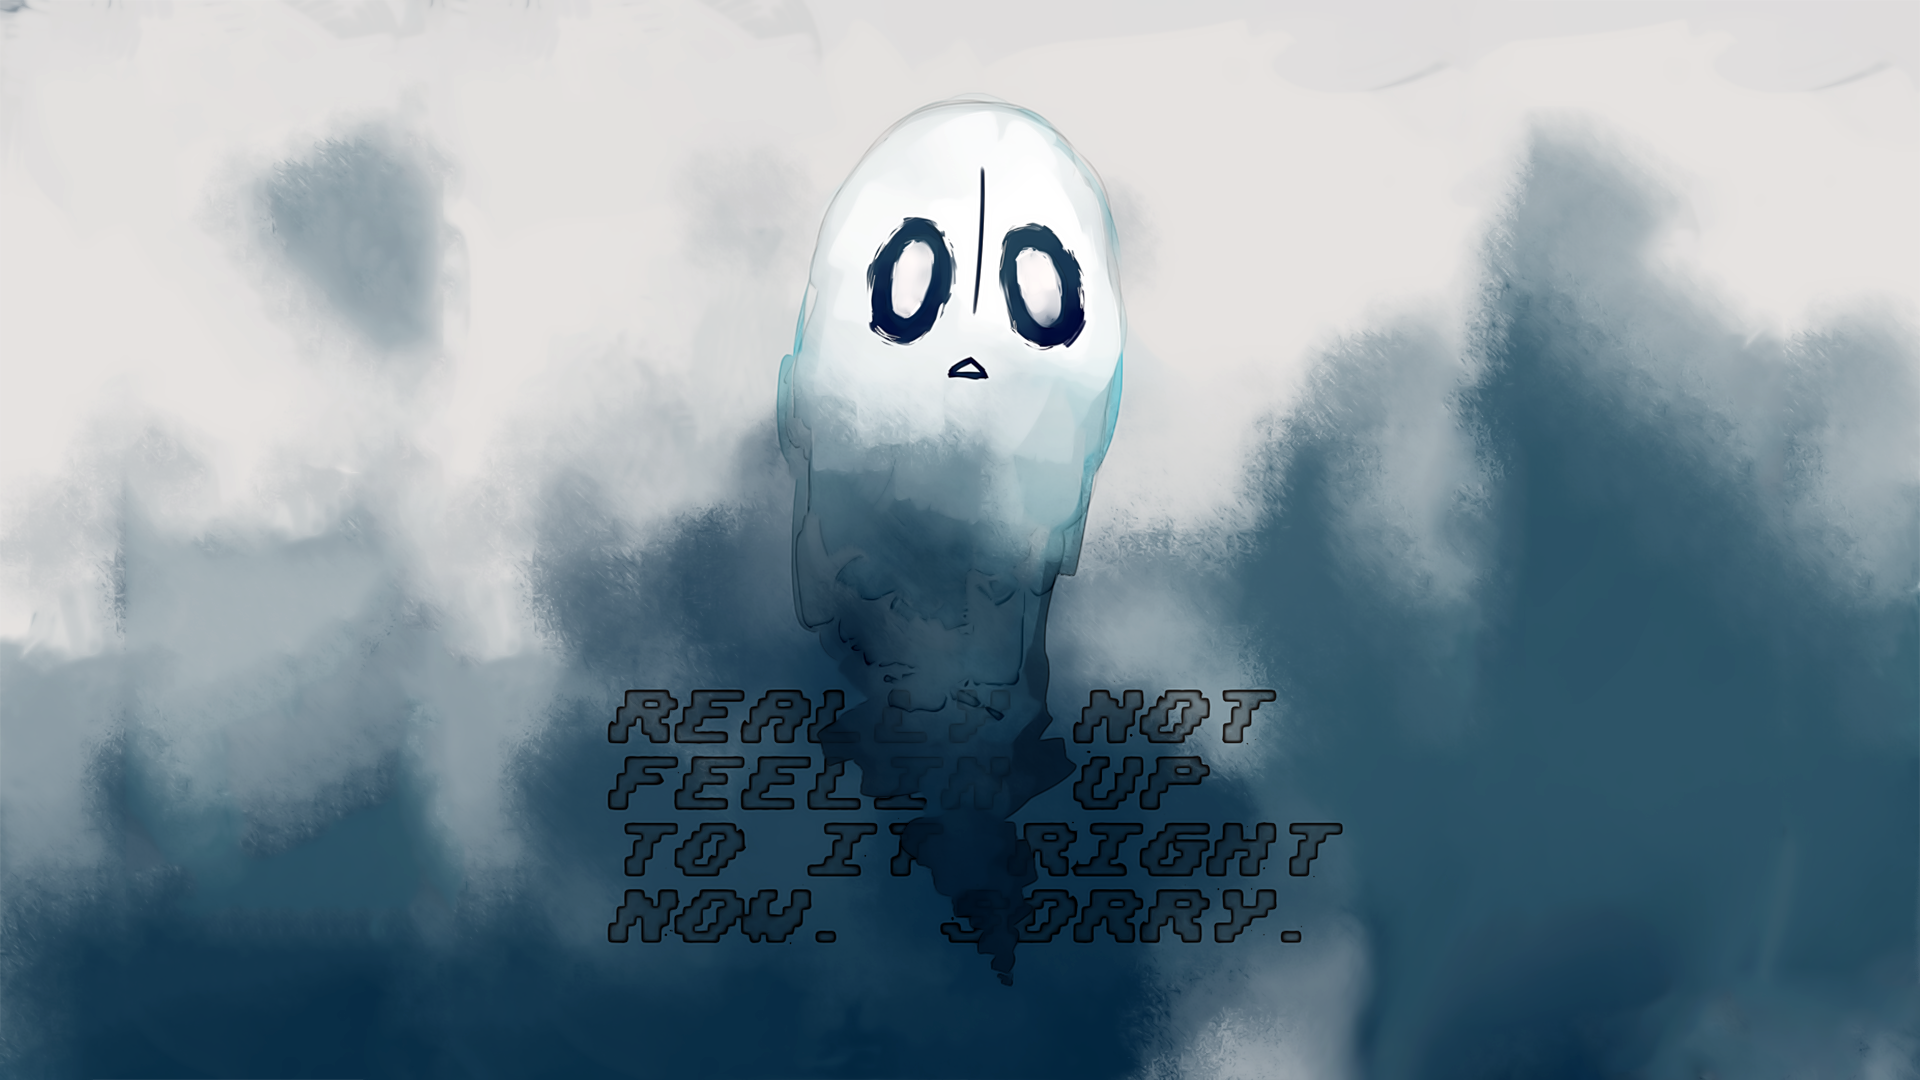 I made a wallpaper for Napstablook, hope you guys like it! : r